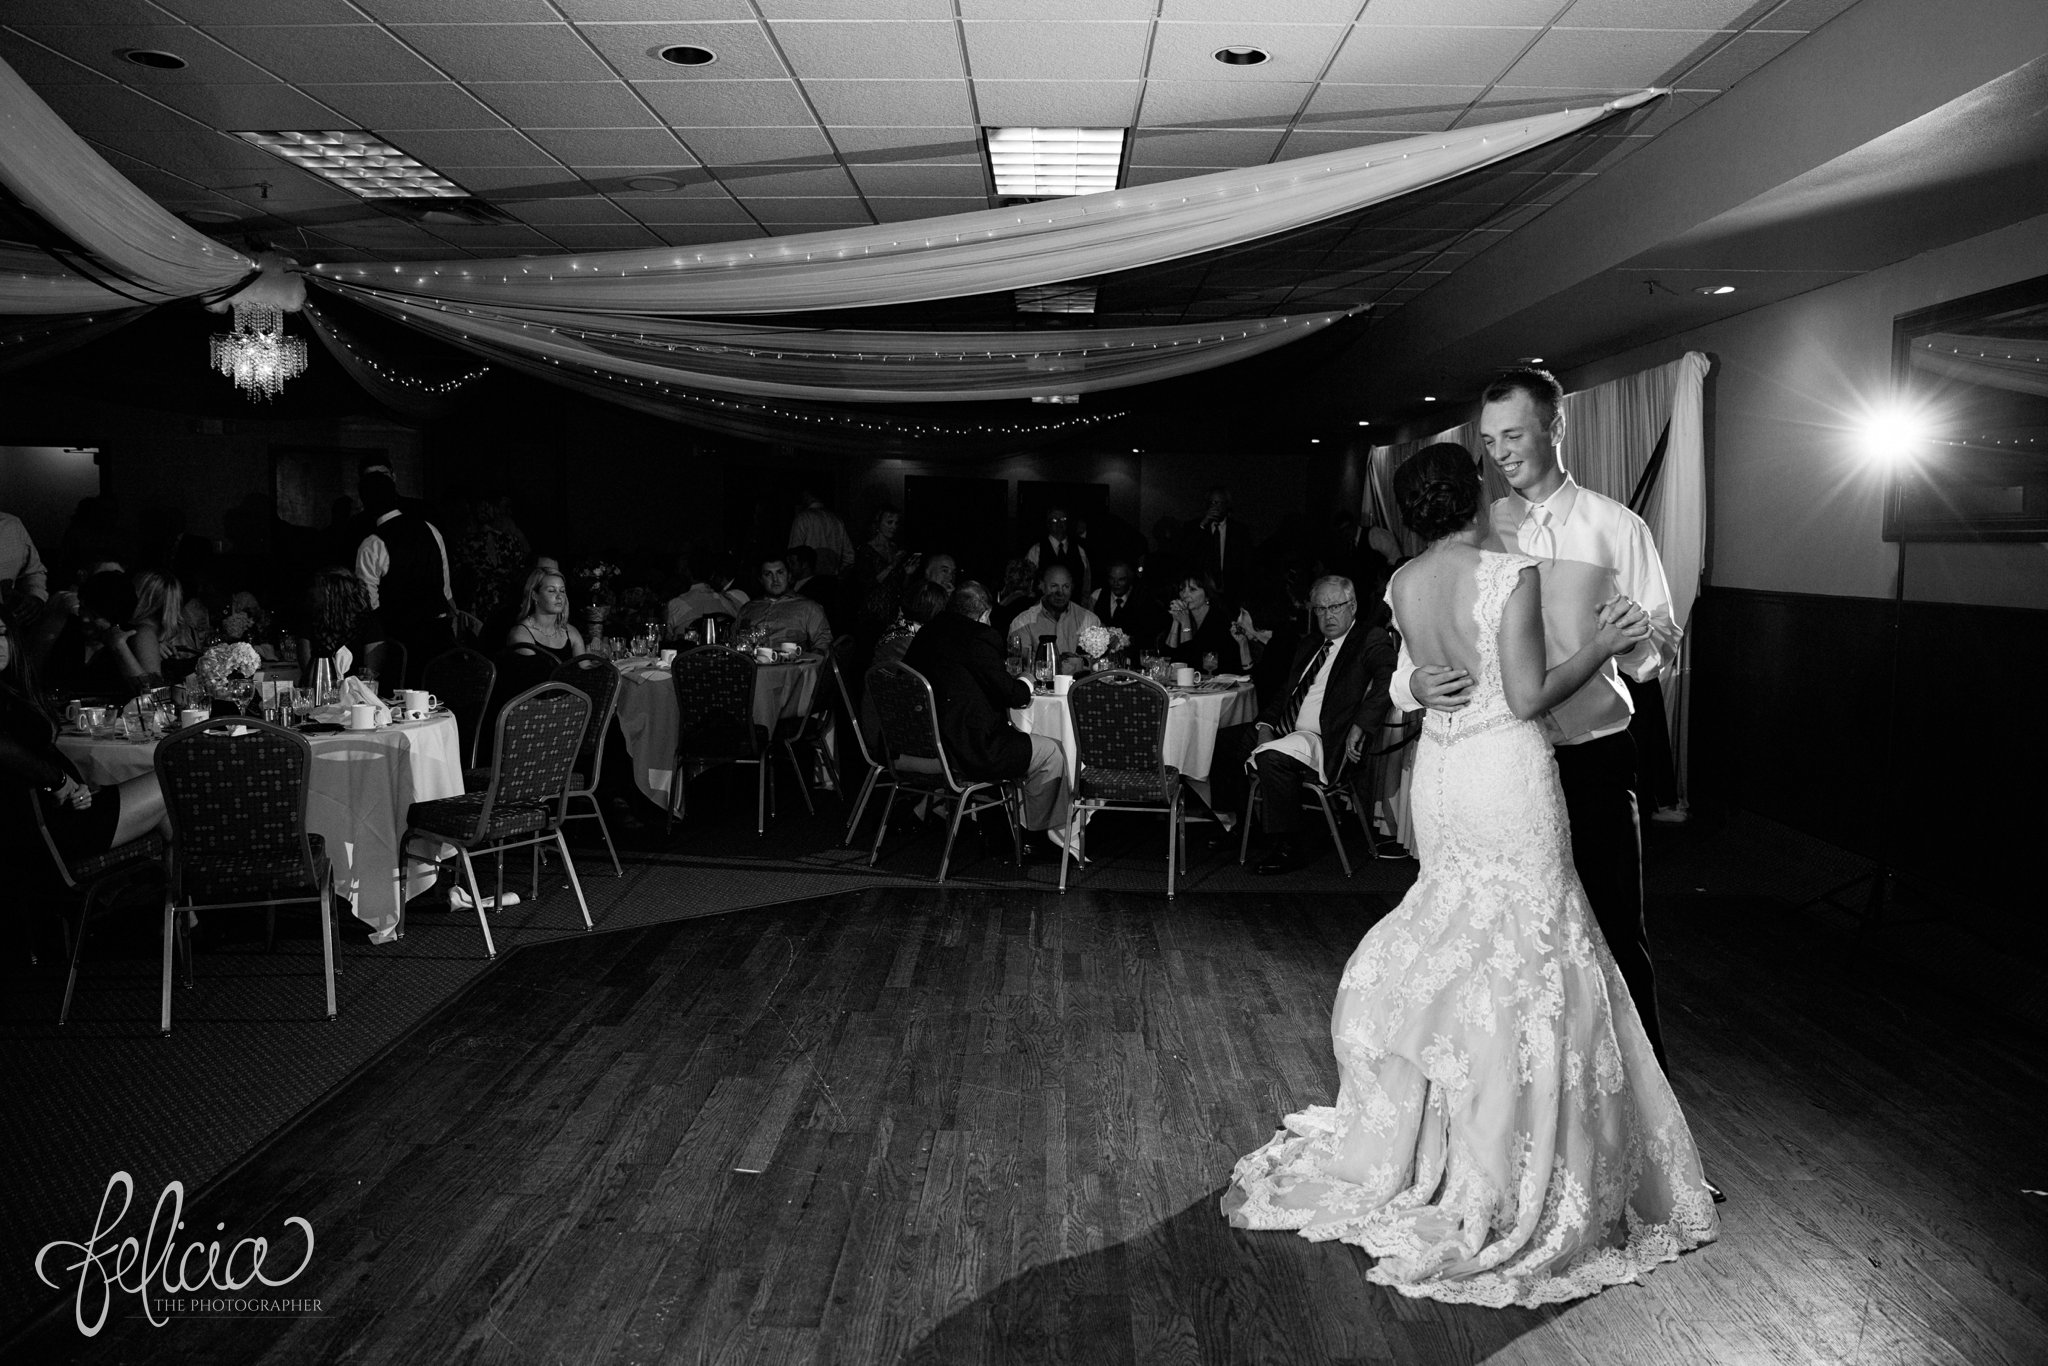 Black and White | Wedding | Wedding Photography | Wedding Photos | Felicia the Photographer | Images by feliciathephotographer.com | Travel Photographer | Duluth | Black Woods Event Center | Occasions Decor | Reception | Reception Activities | First Dance 